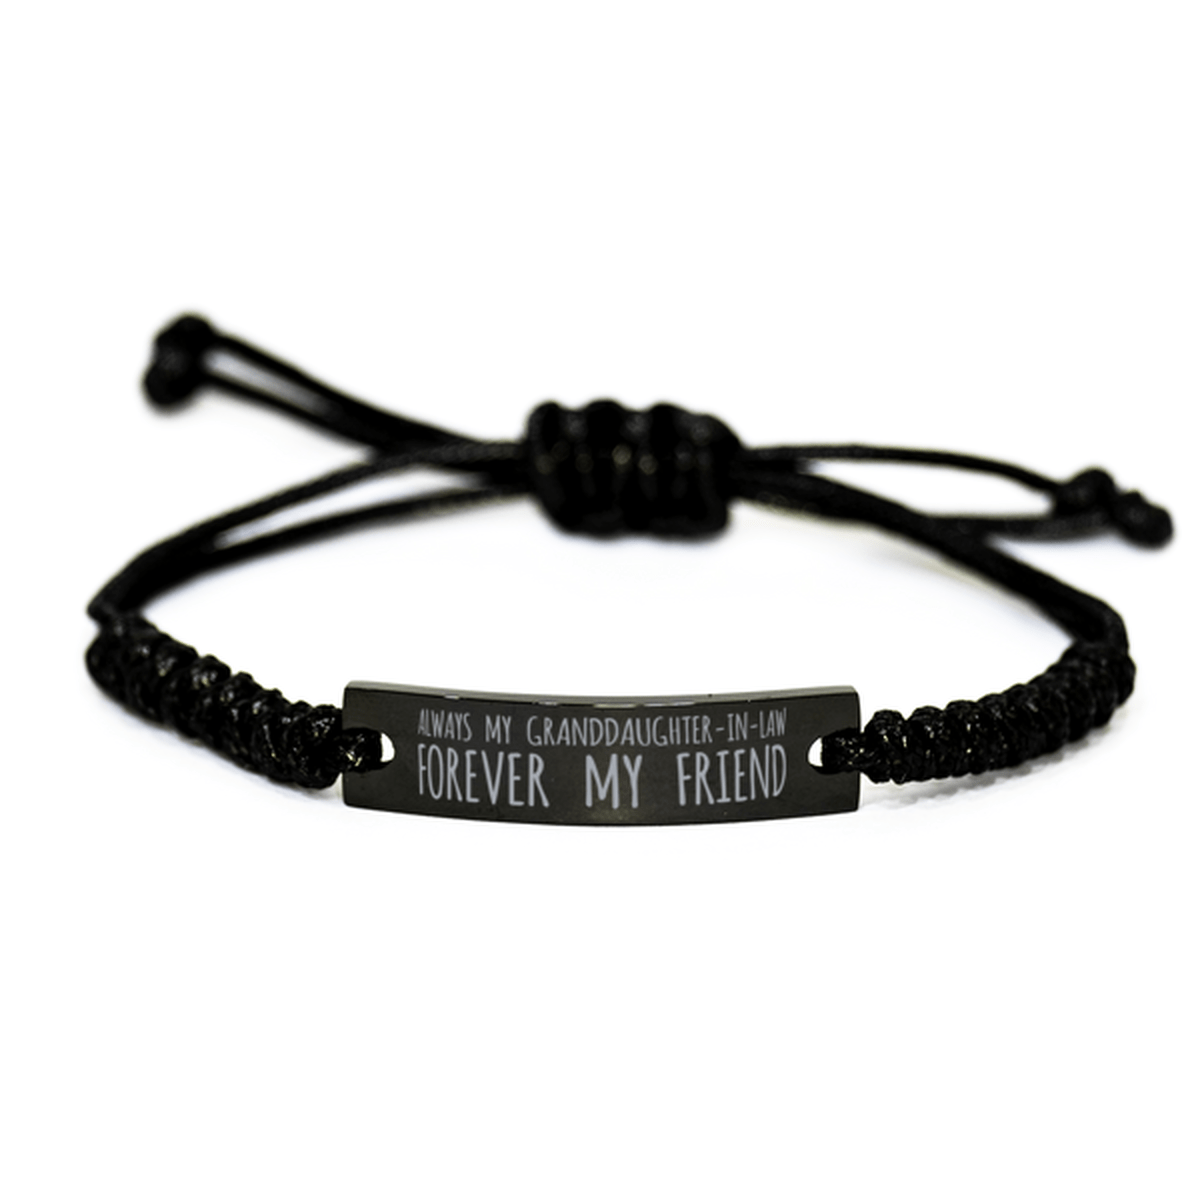 Inspirational Granddaughter-In-Law Black Rope Bracelet, Always My Granddaughter-In-Law Forever My Friend, Best Birthday Gifts For Family